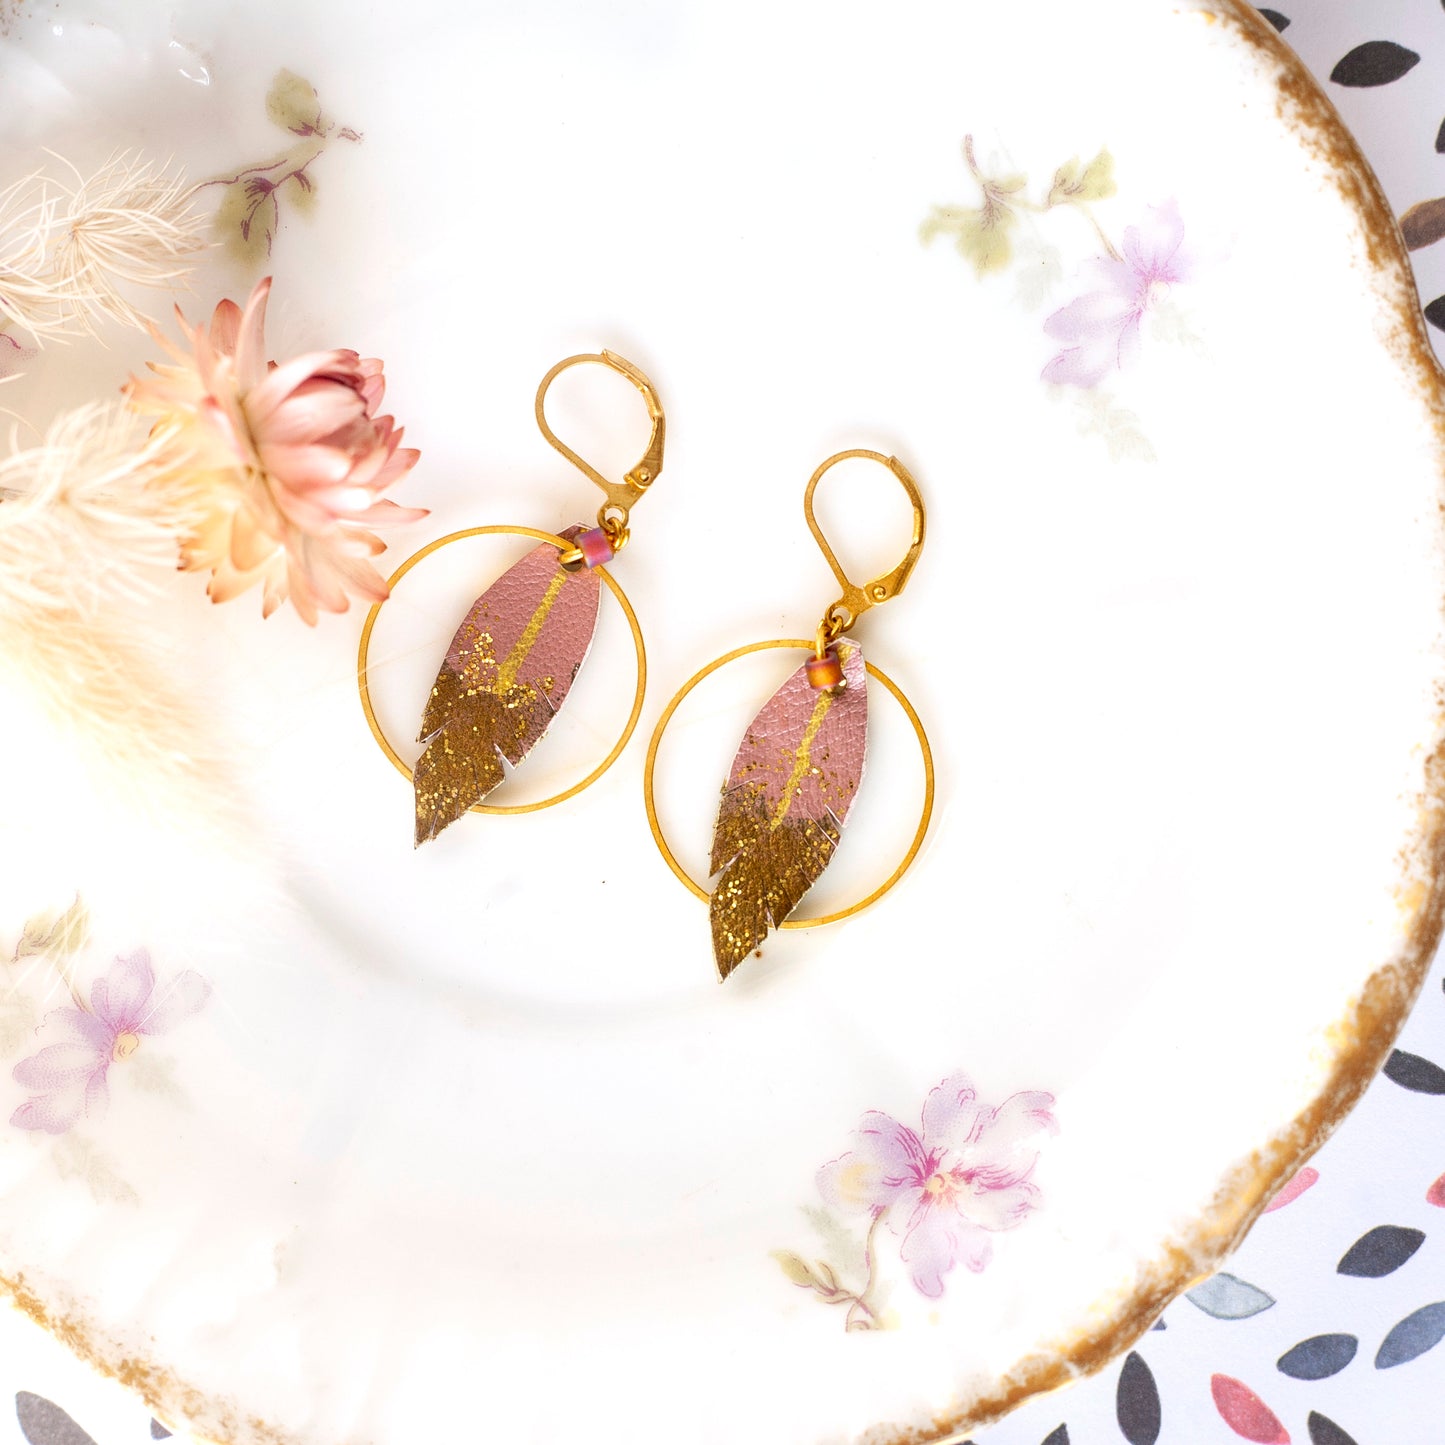 Feather hoop earrings in old pink leather